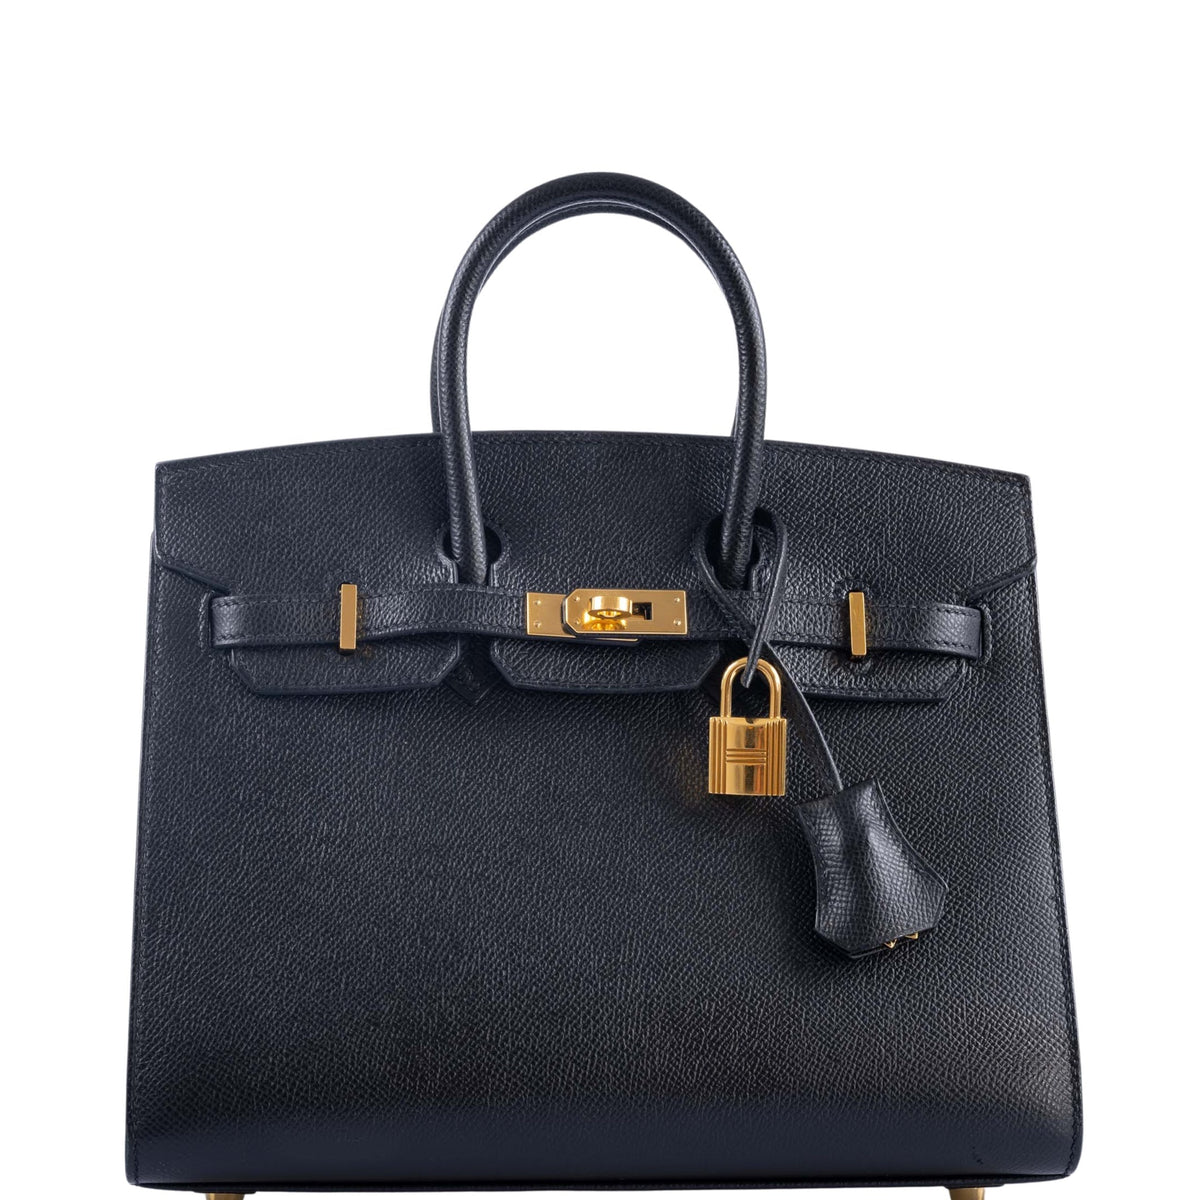 One can never have enough black handbags Birkin 25 Gold Hardware